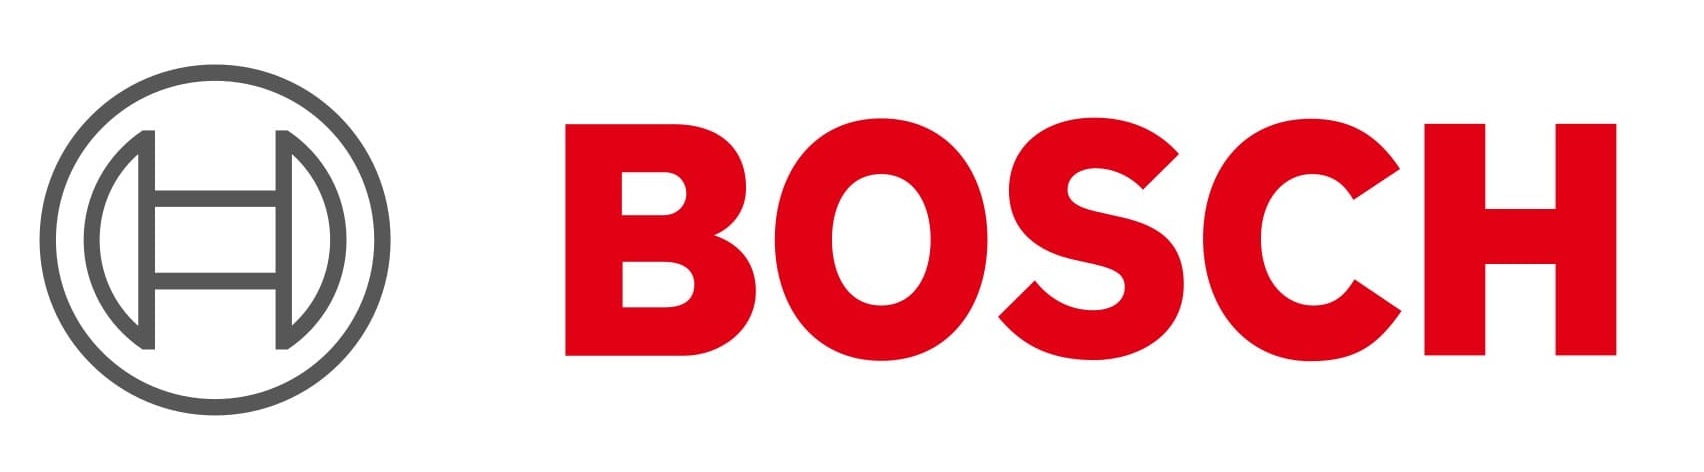 BOSCH Stove Maintenance, Kenmore Electric Stove Near Me